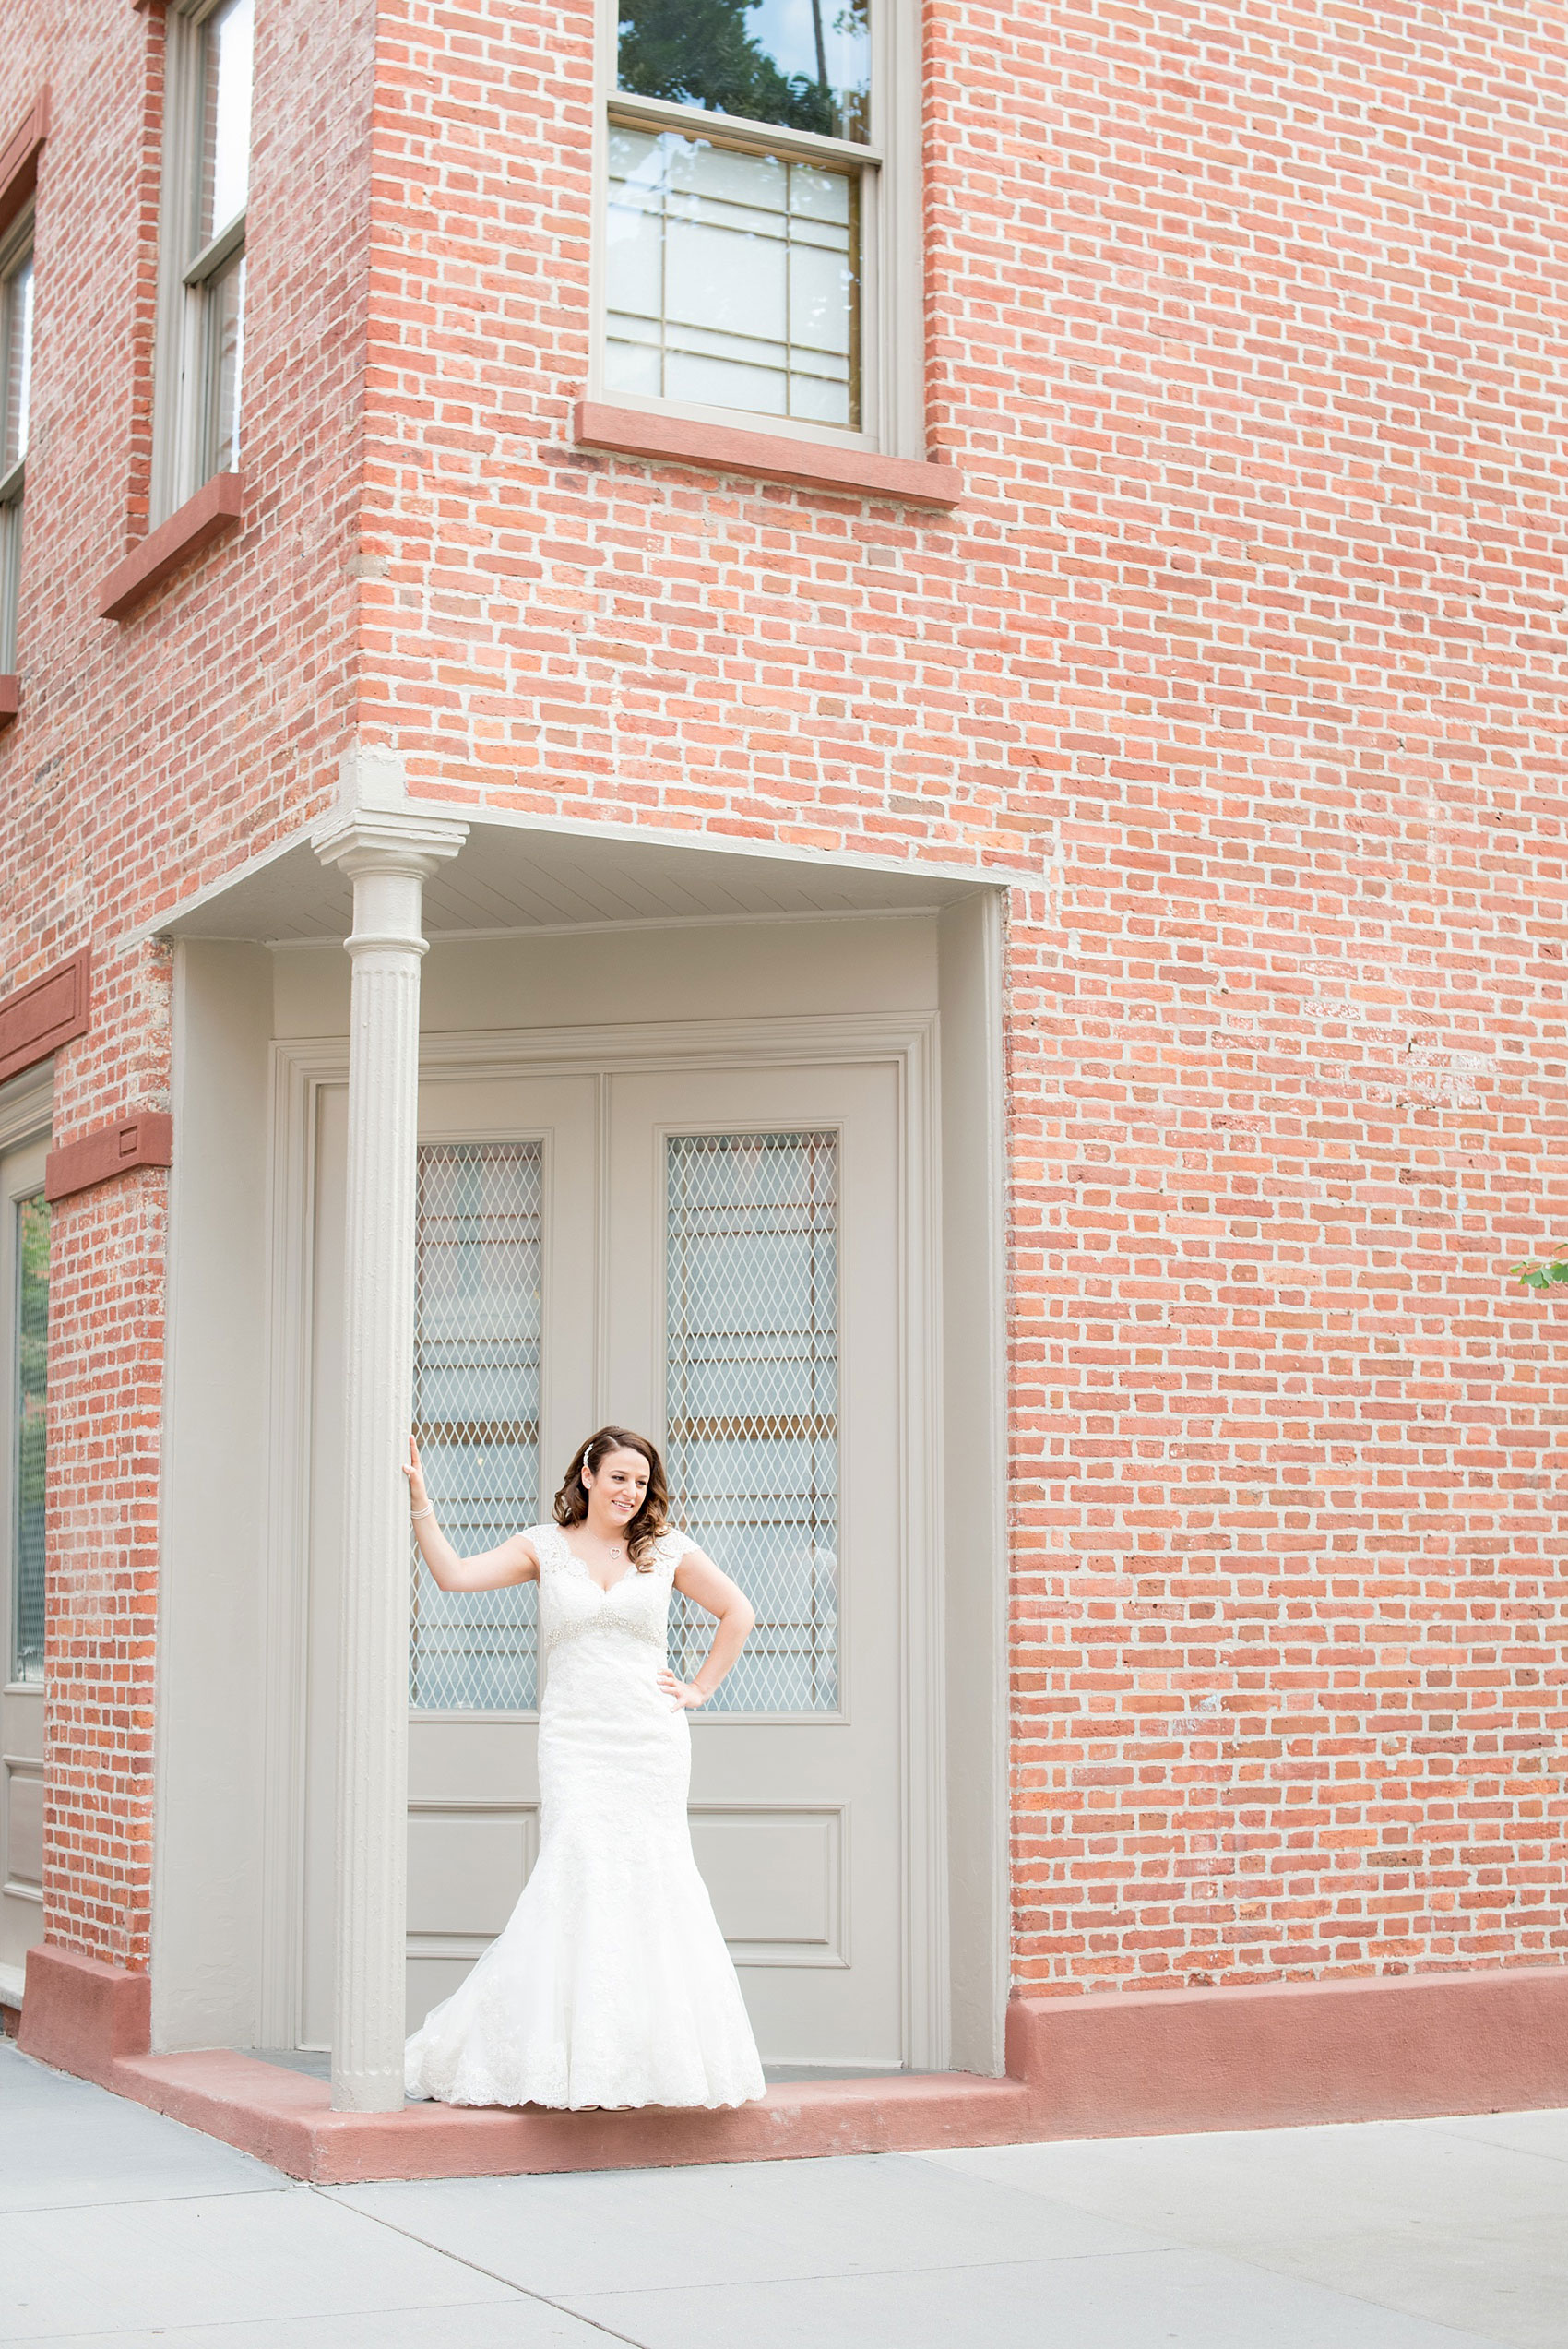 Mikkel Paige Photography photos of a NYC wedding at Tribeca Rooftop. An architectural brick wall image of the bride in her cap sleeve lace Anita Graham wedding gown.